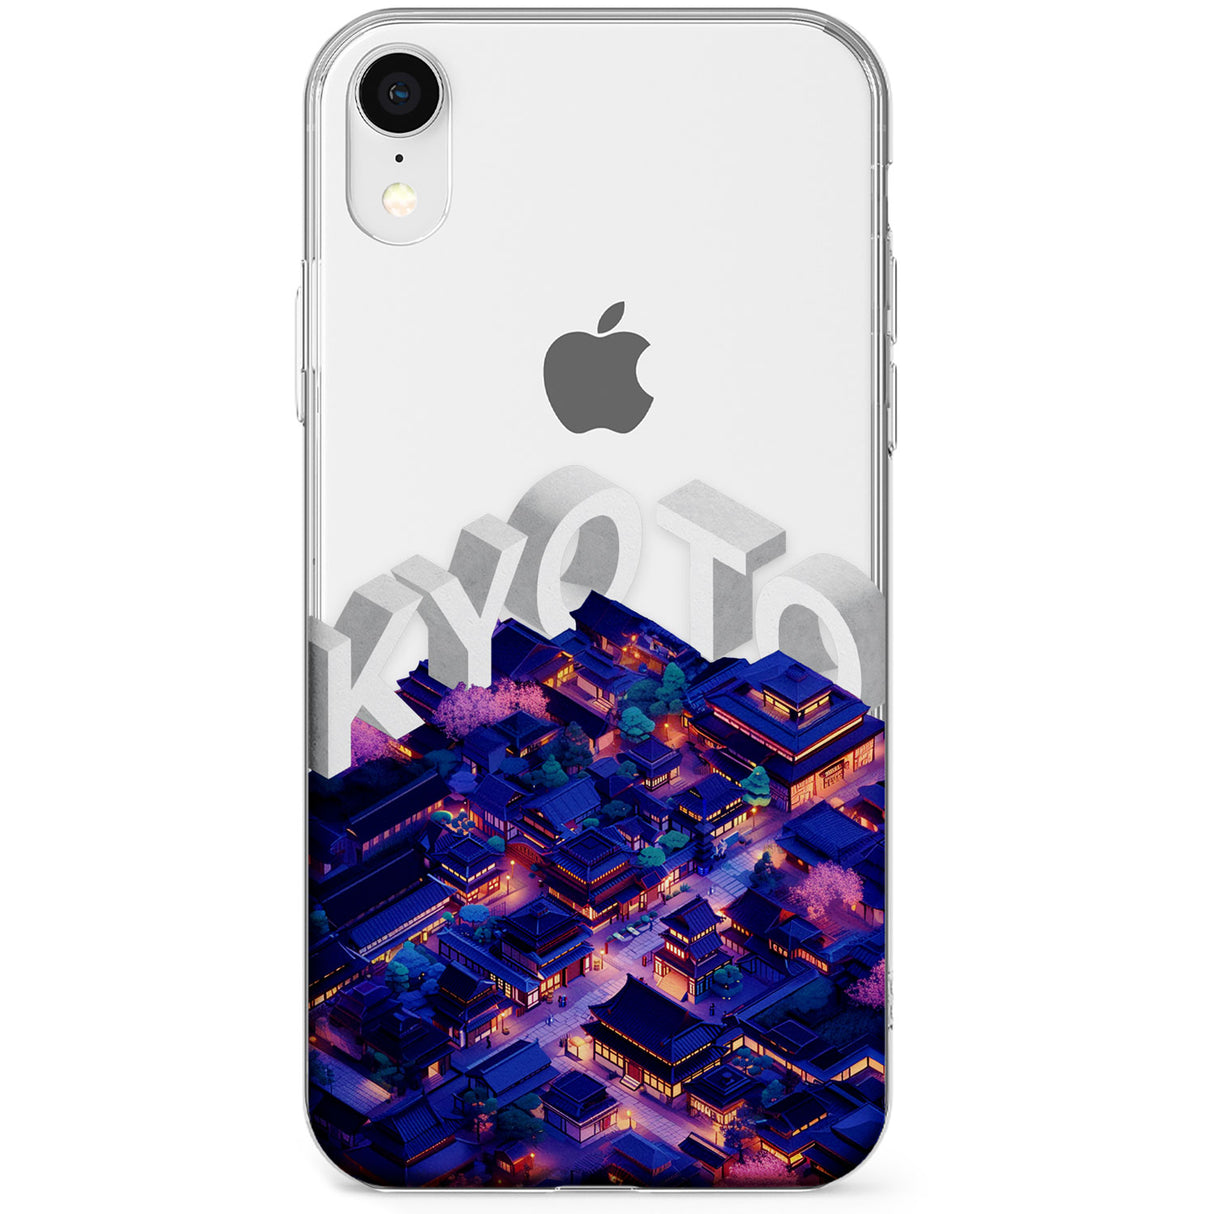 Kyoto Phone Case for iPhone X, XS Max, XR